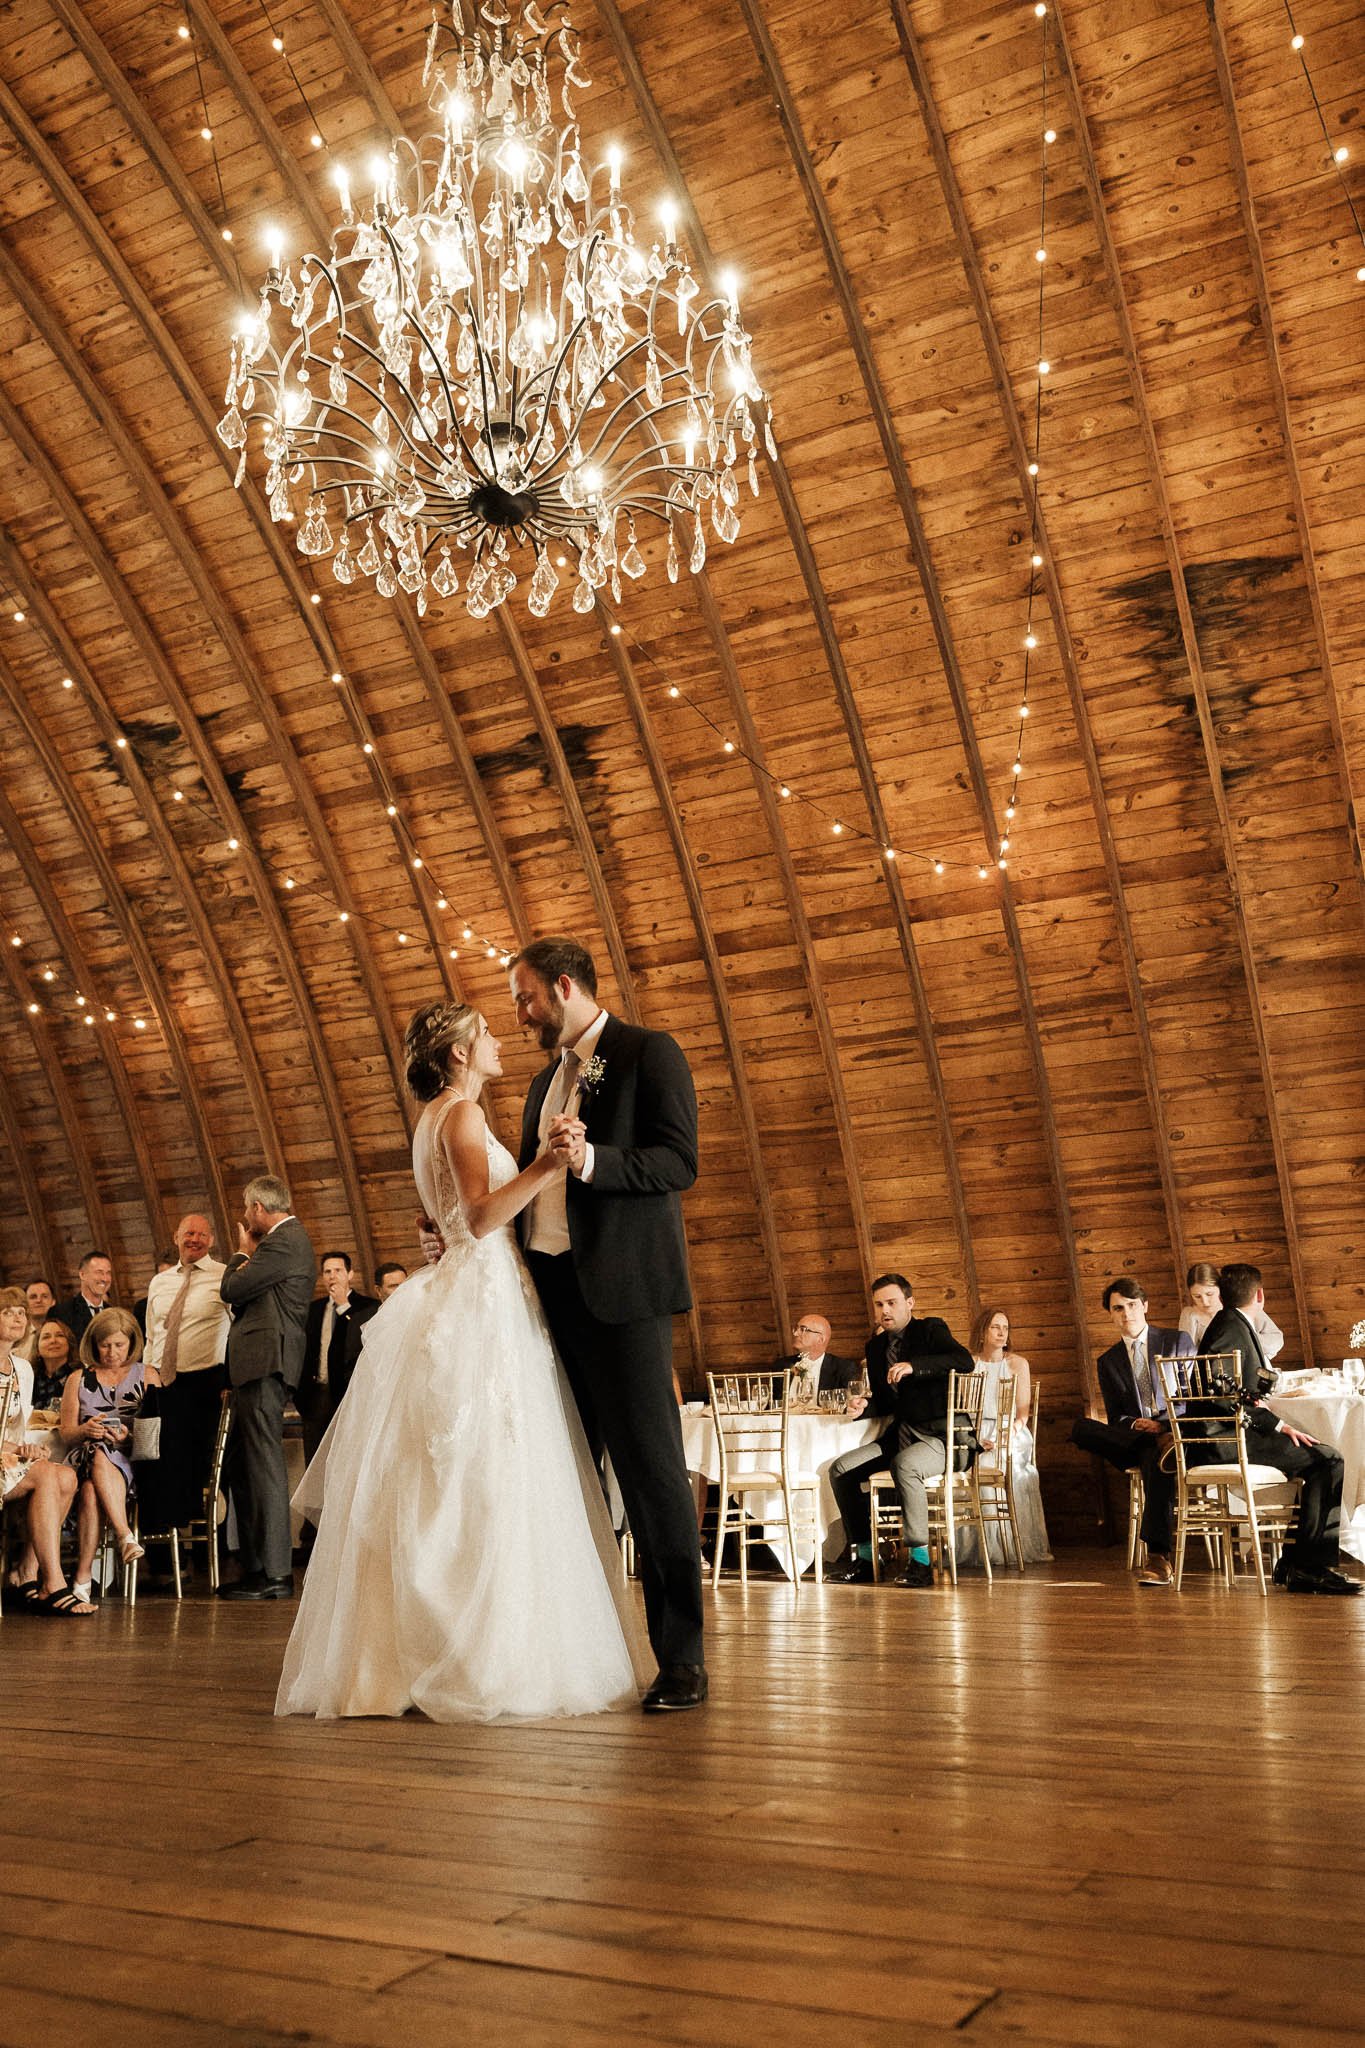  outdoor wedding venues in pittsburgh irons mill farmstead 